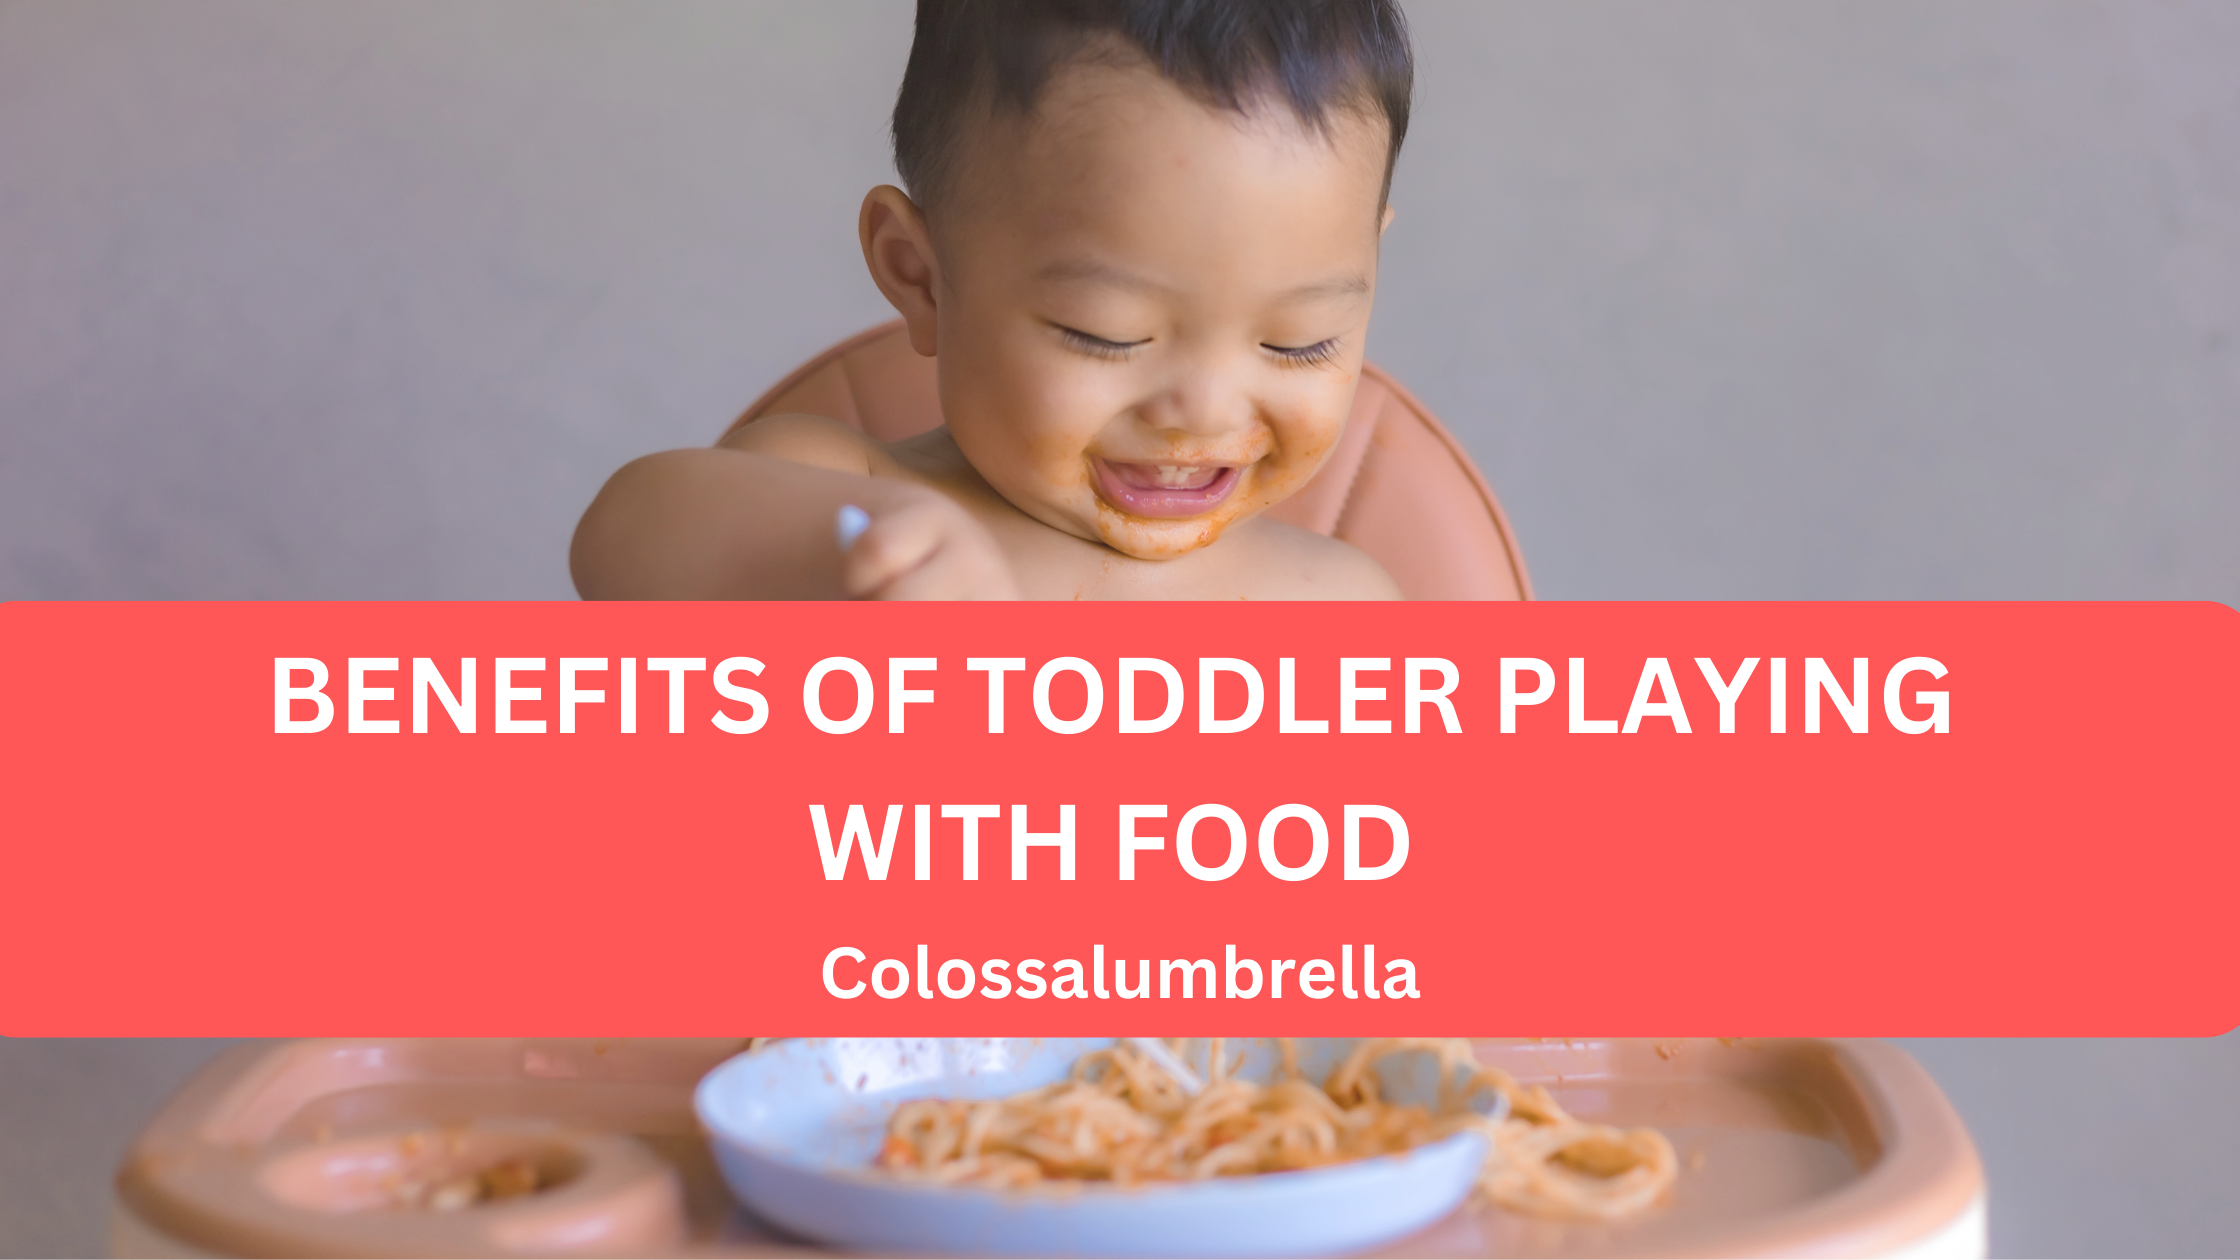 8 Important Reasons why playing with food is good for toddlers